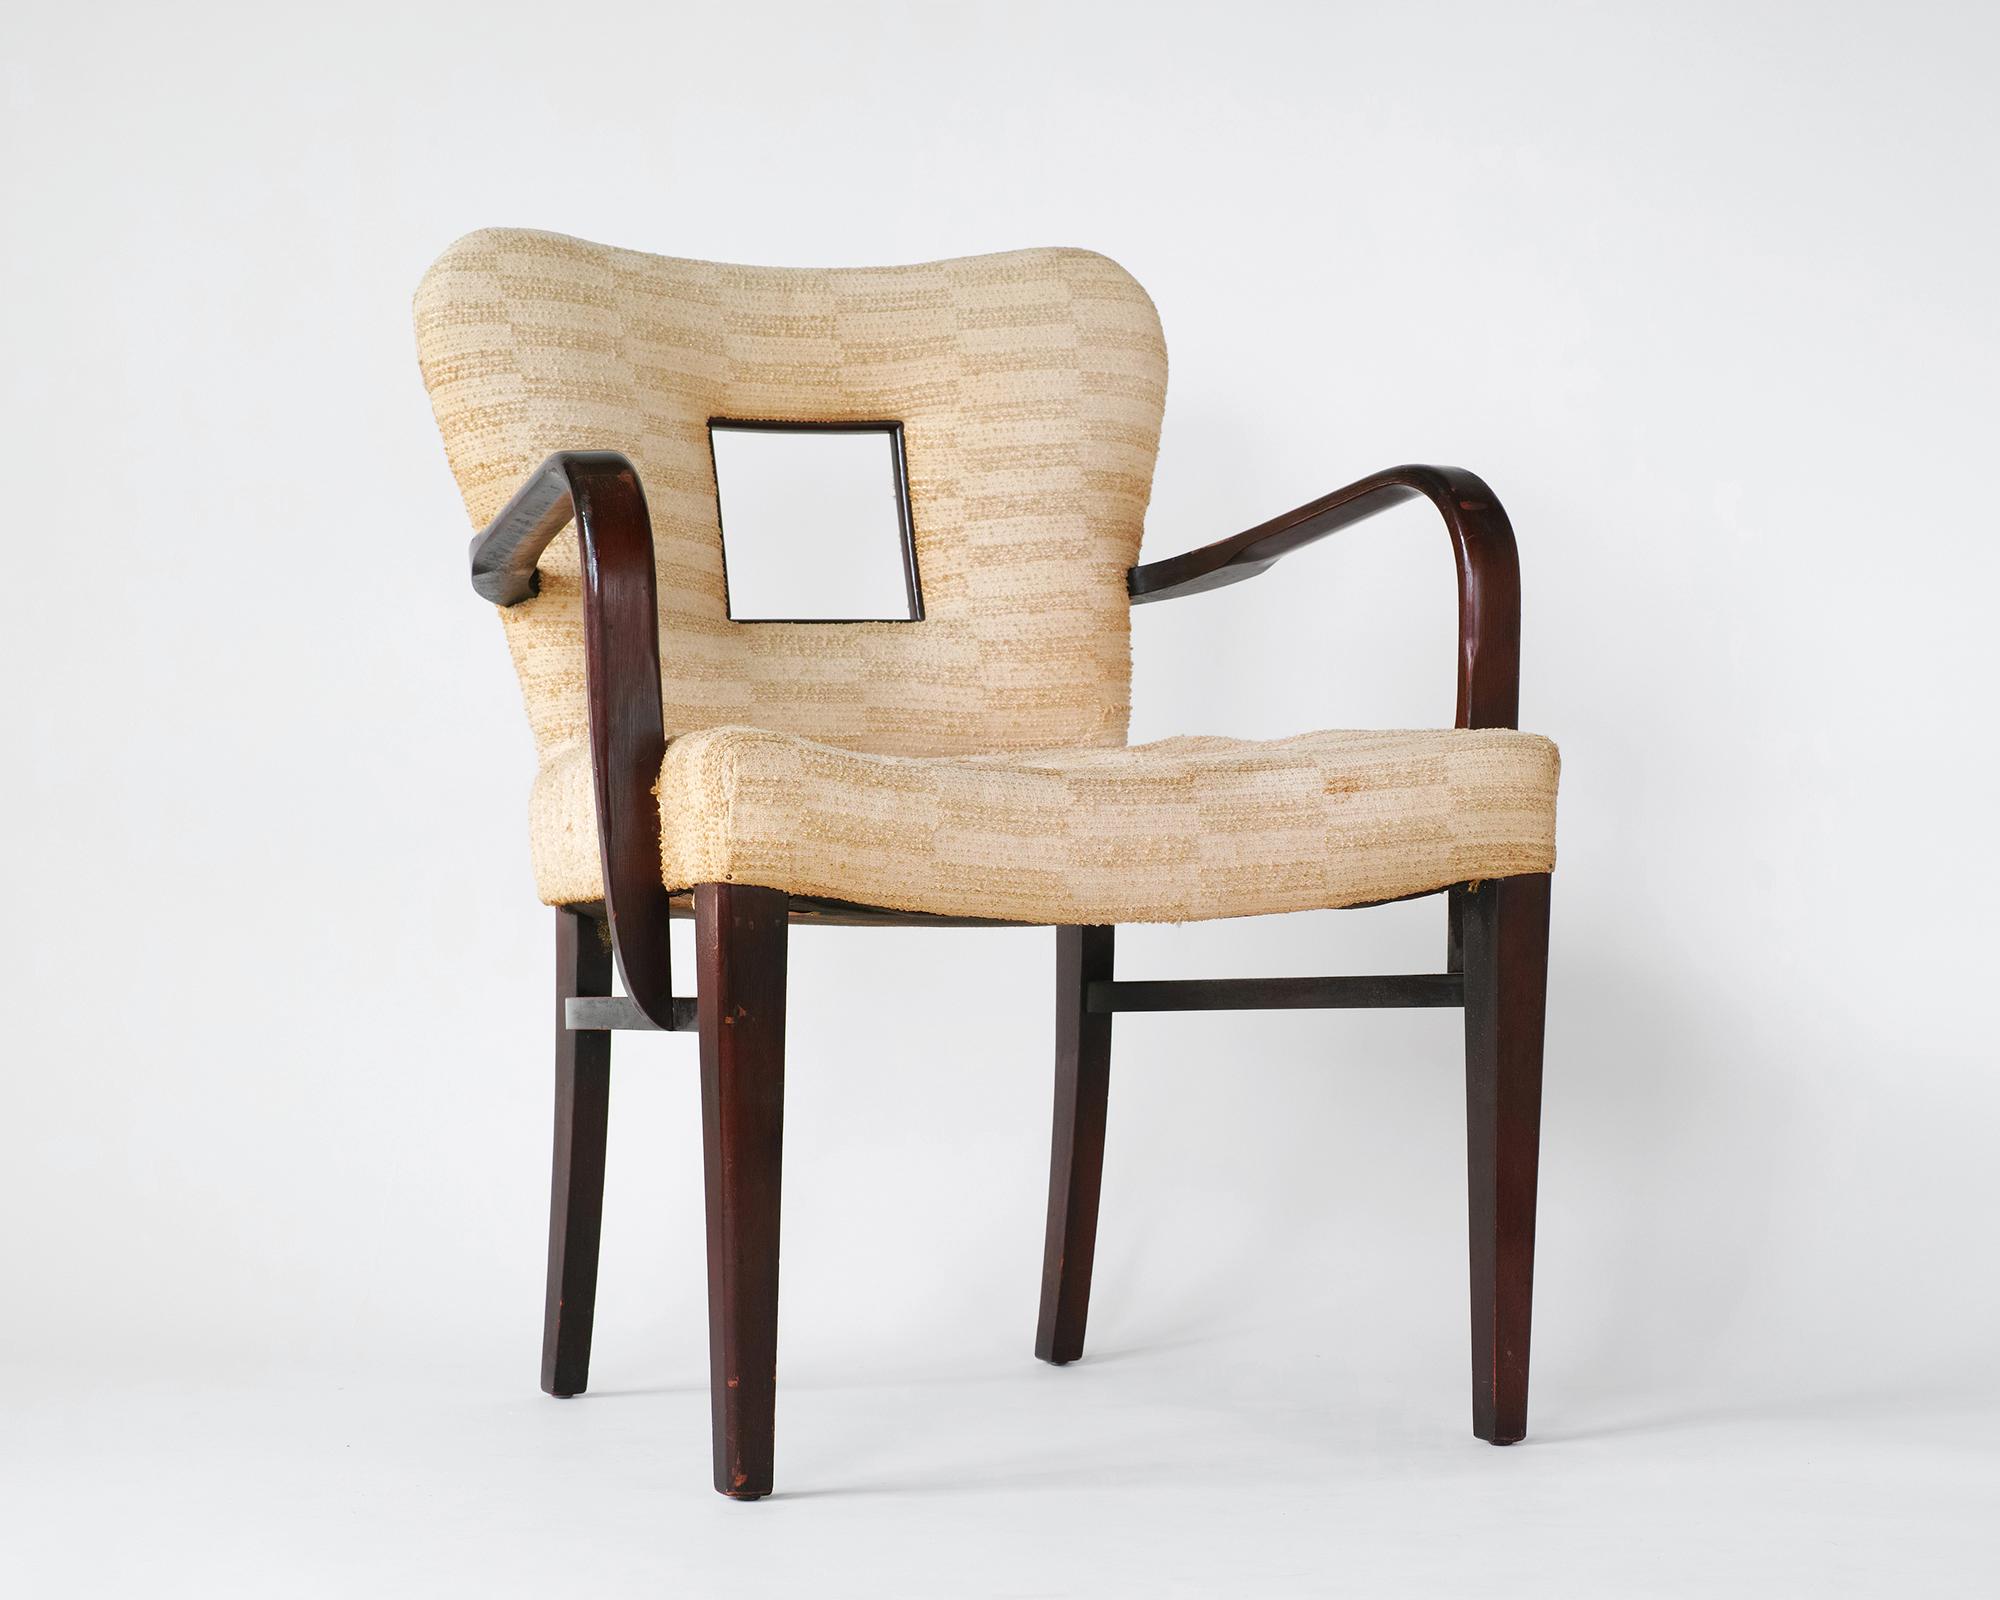 For your consideration is this rare model 2254 ½ armchair designed by Paul Frankl in all-original, unrestored condition. It features a sculptural solid wood frame with delicate curves and a distinctive window cutout in the backrest. The arm height